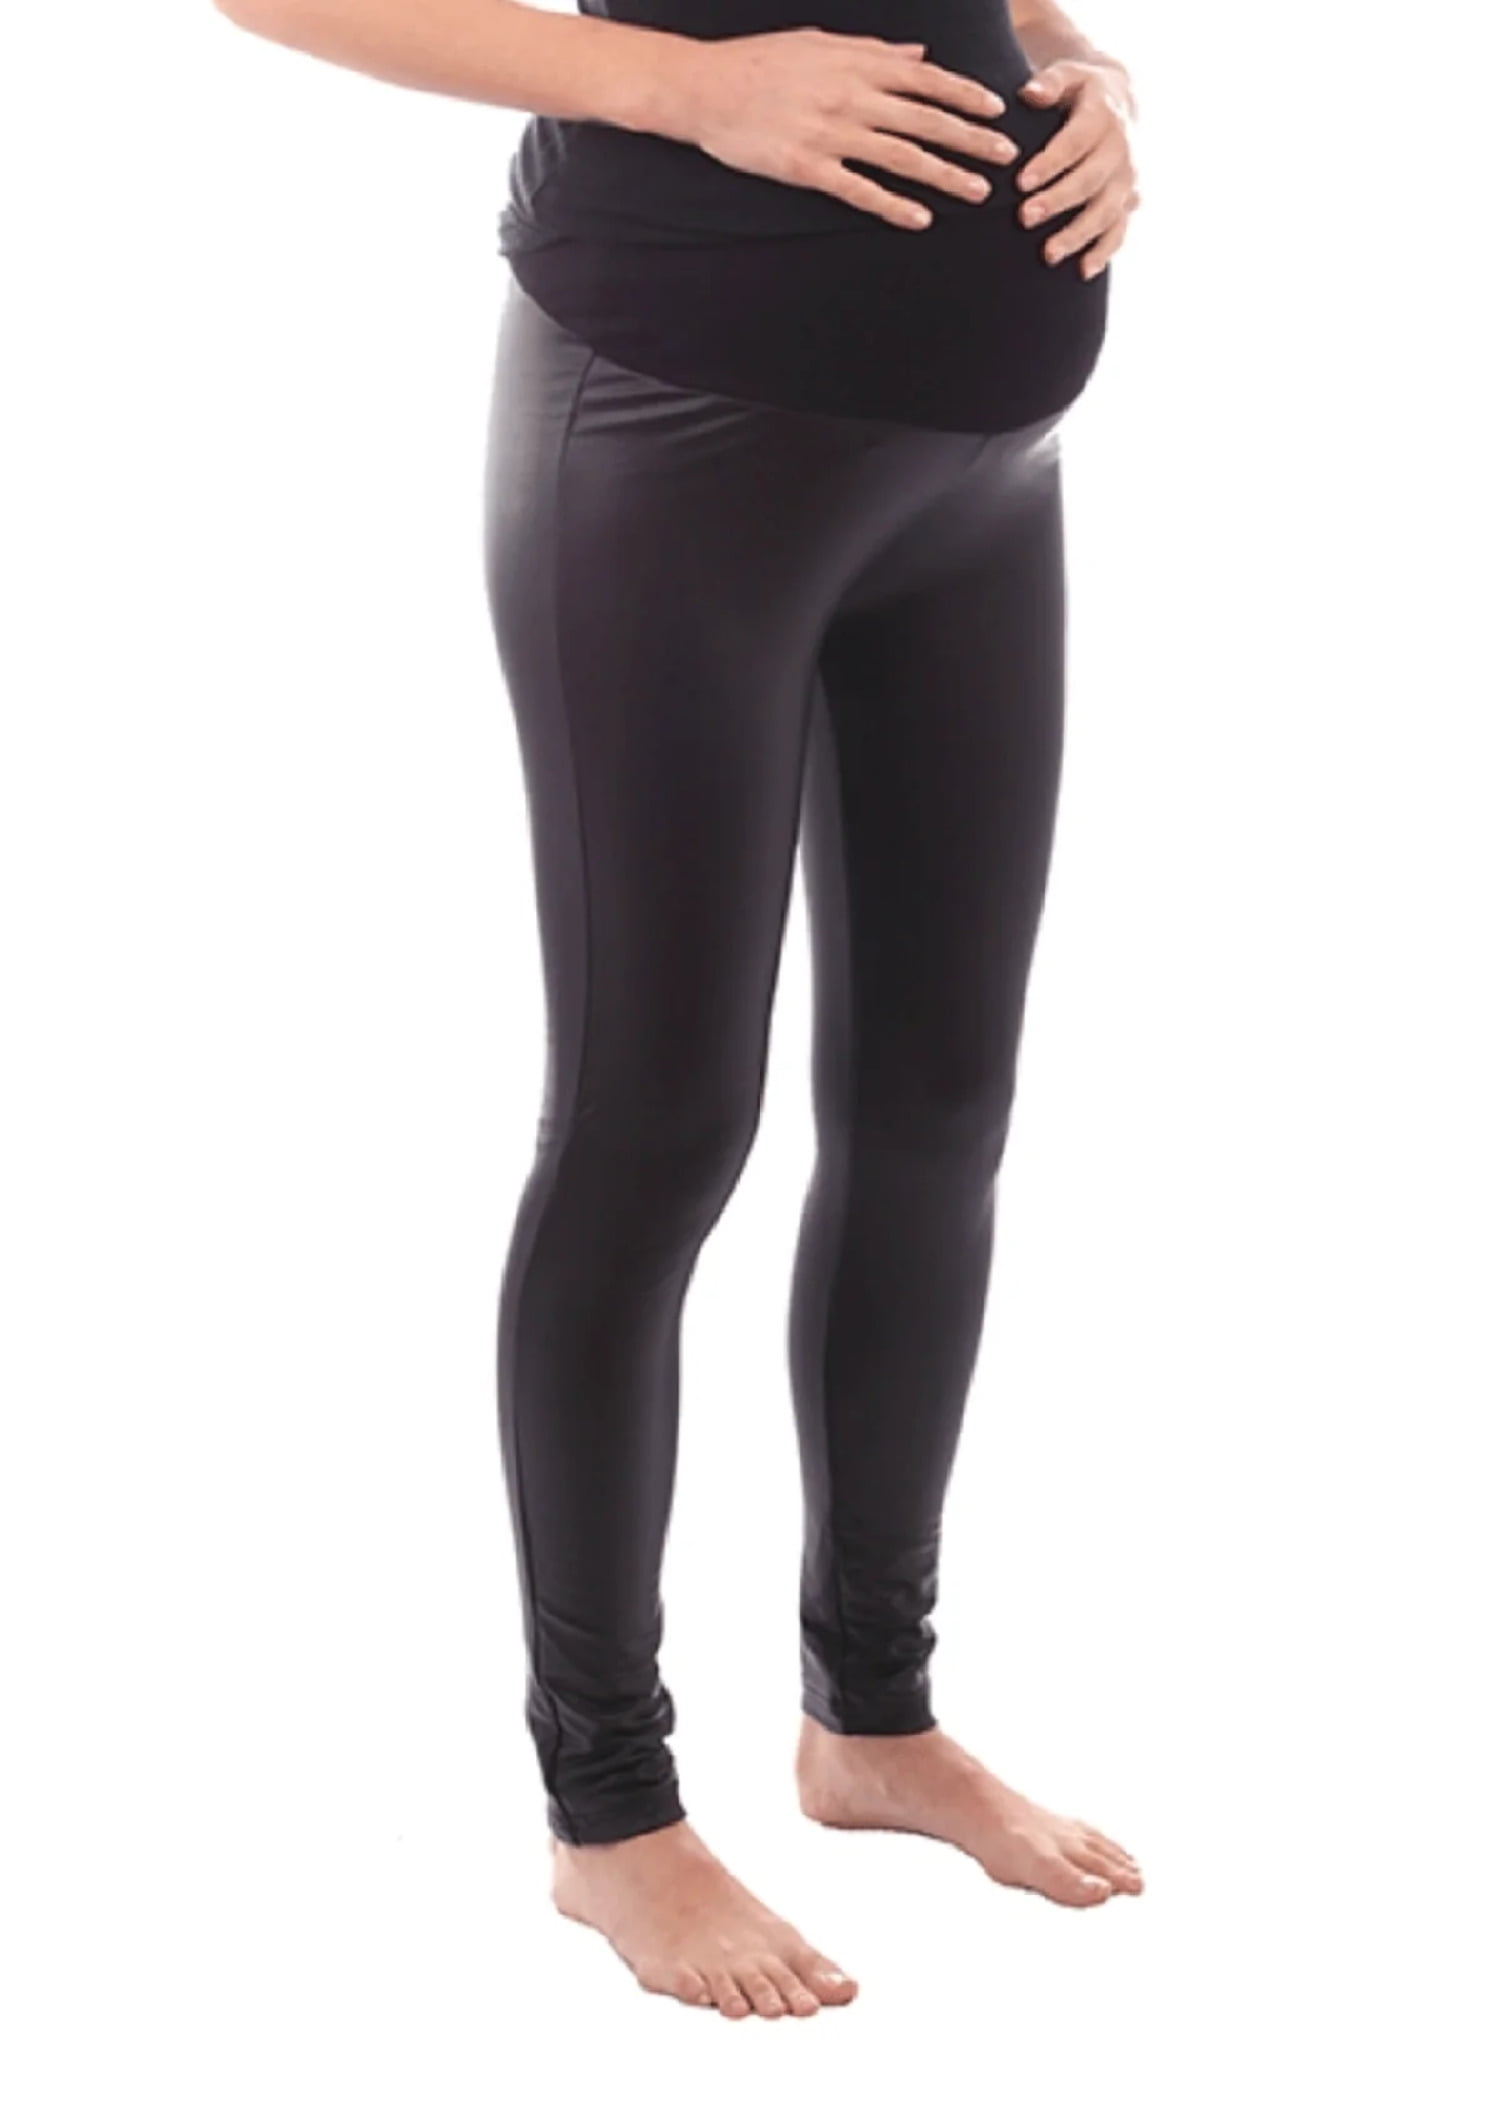 Taqqpue Women's Maternity Fleece Lined Leggings Over the Belly